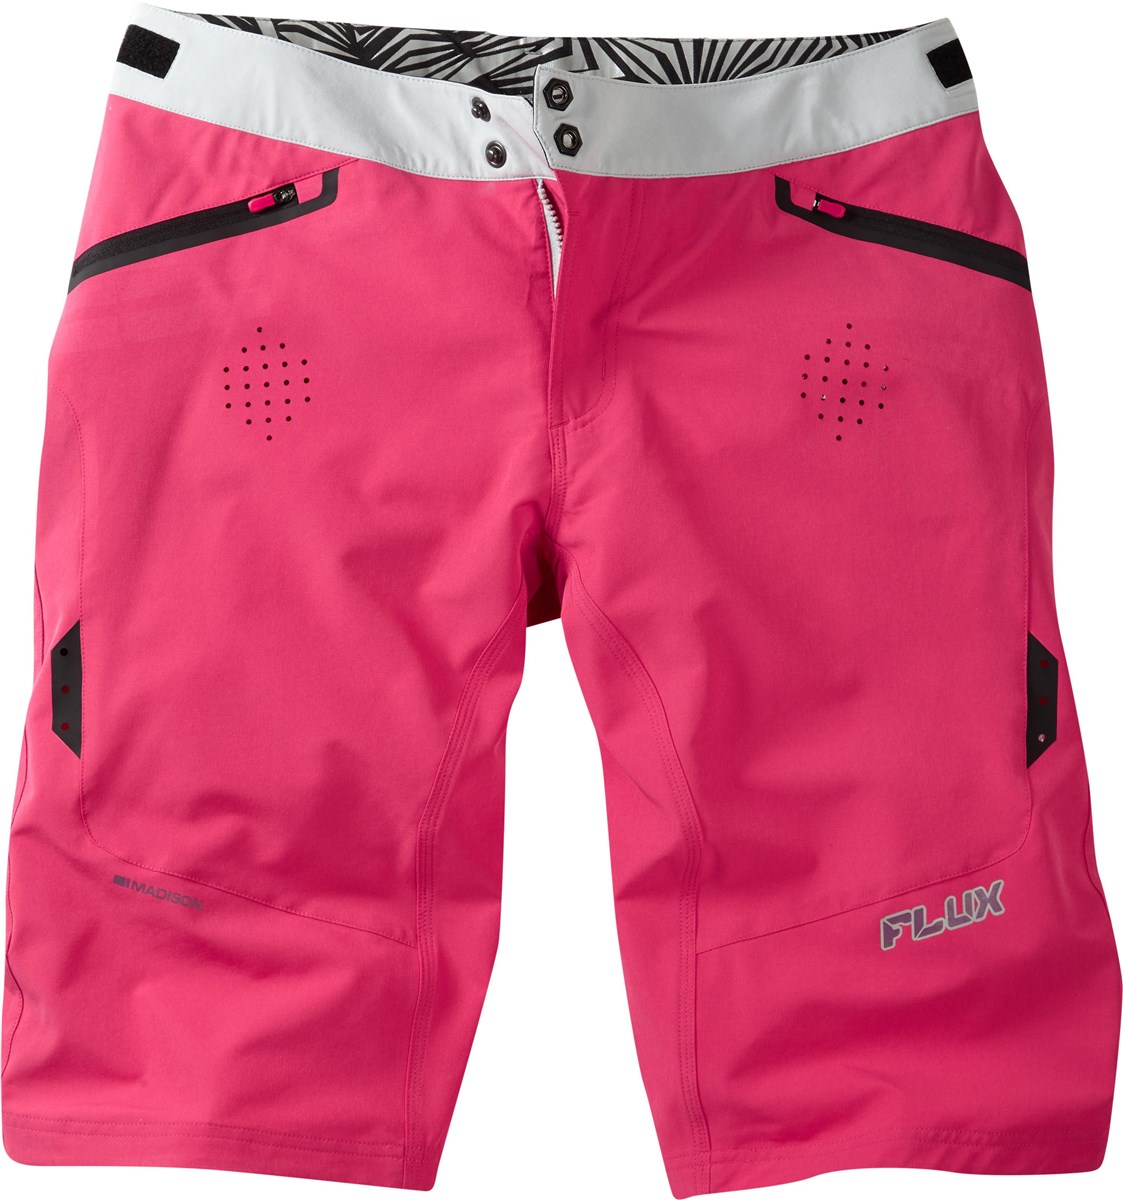 Madison Flux Womens Cycling Shorts